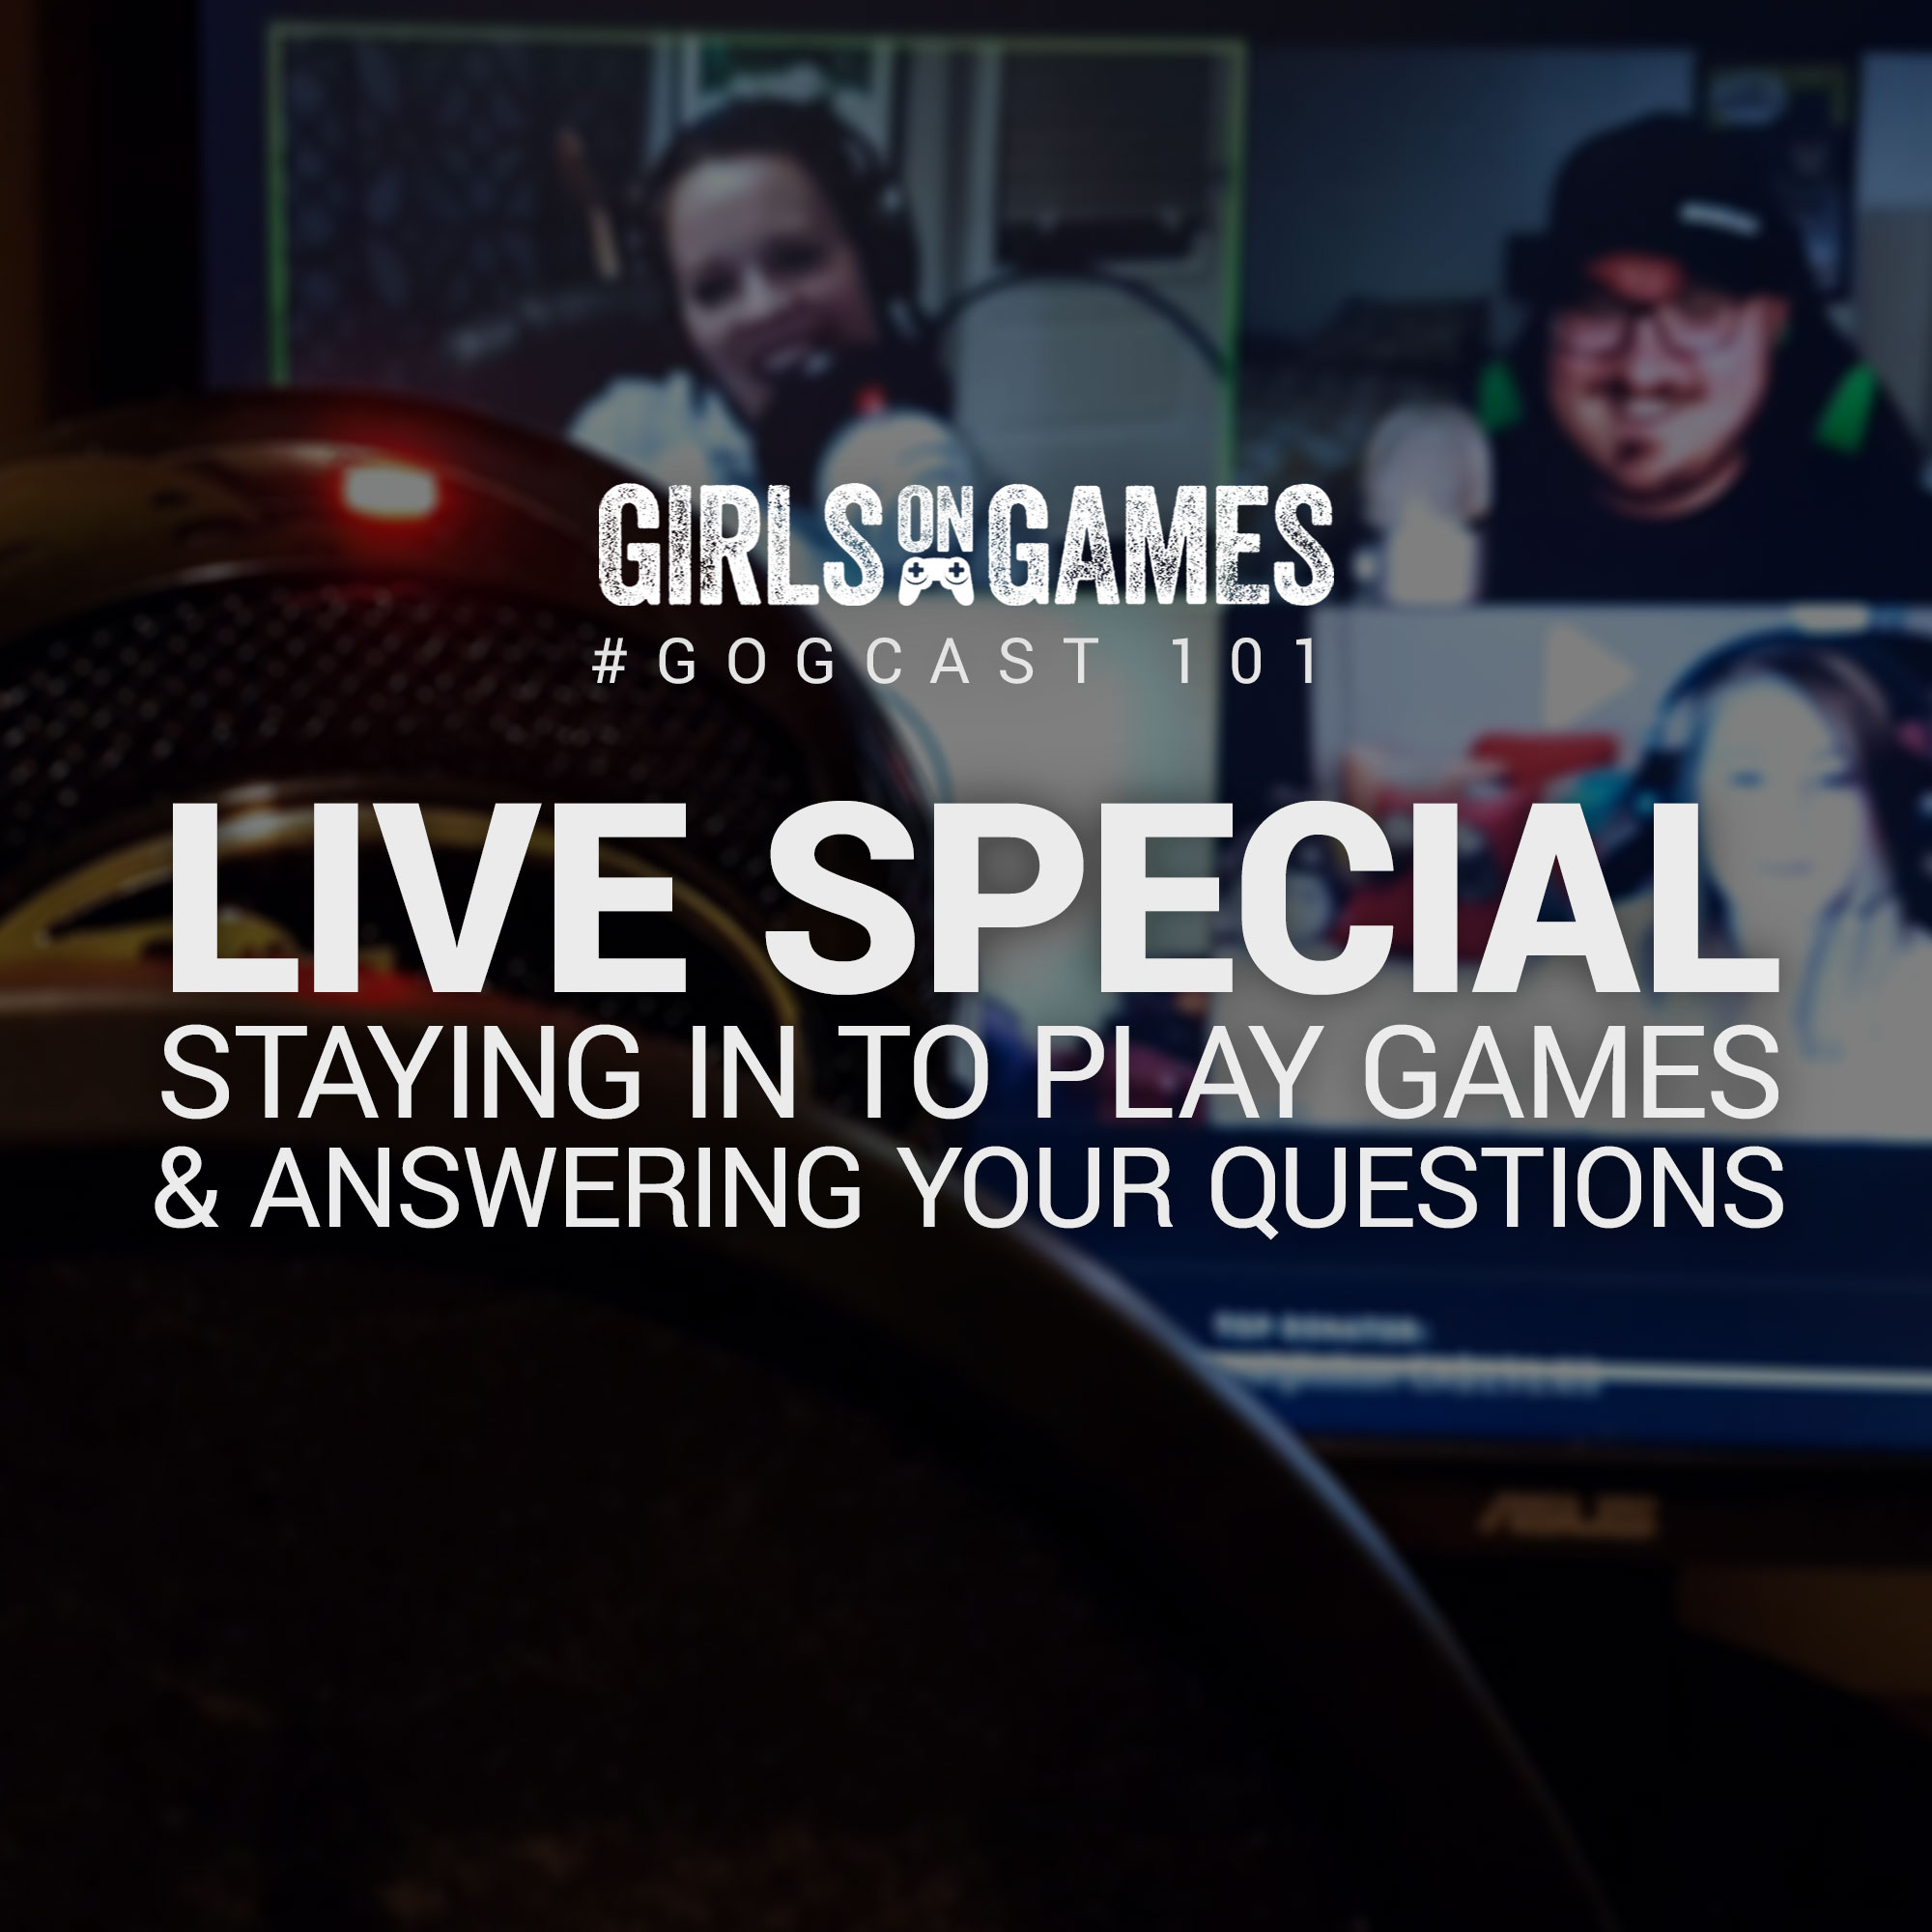 GoGCast 101: Live Special! Staying In to Play Games & Answering Your Questions